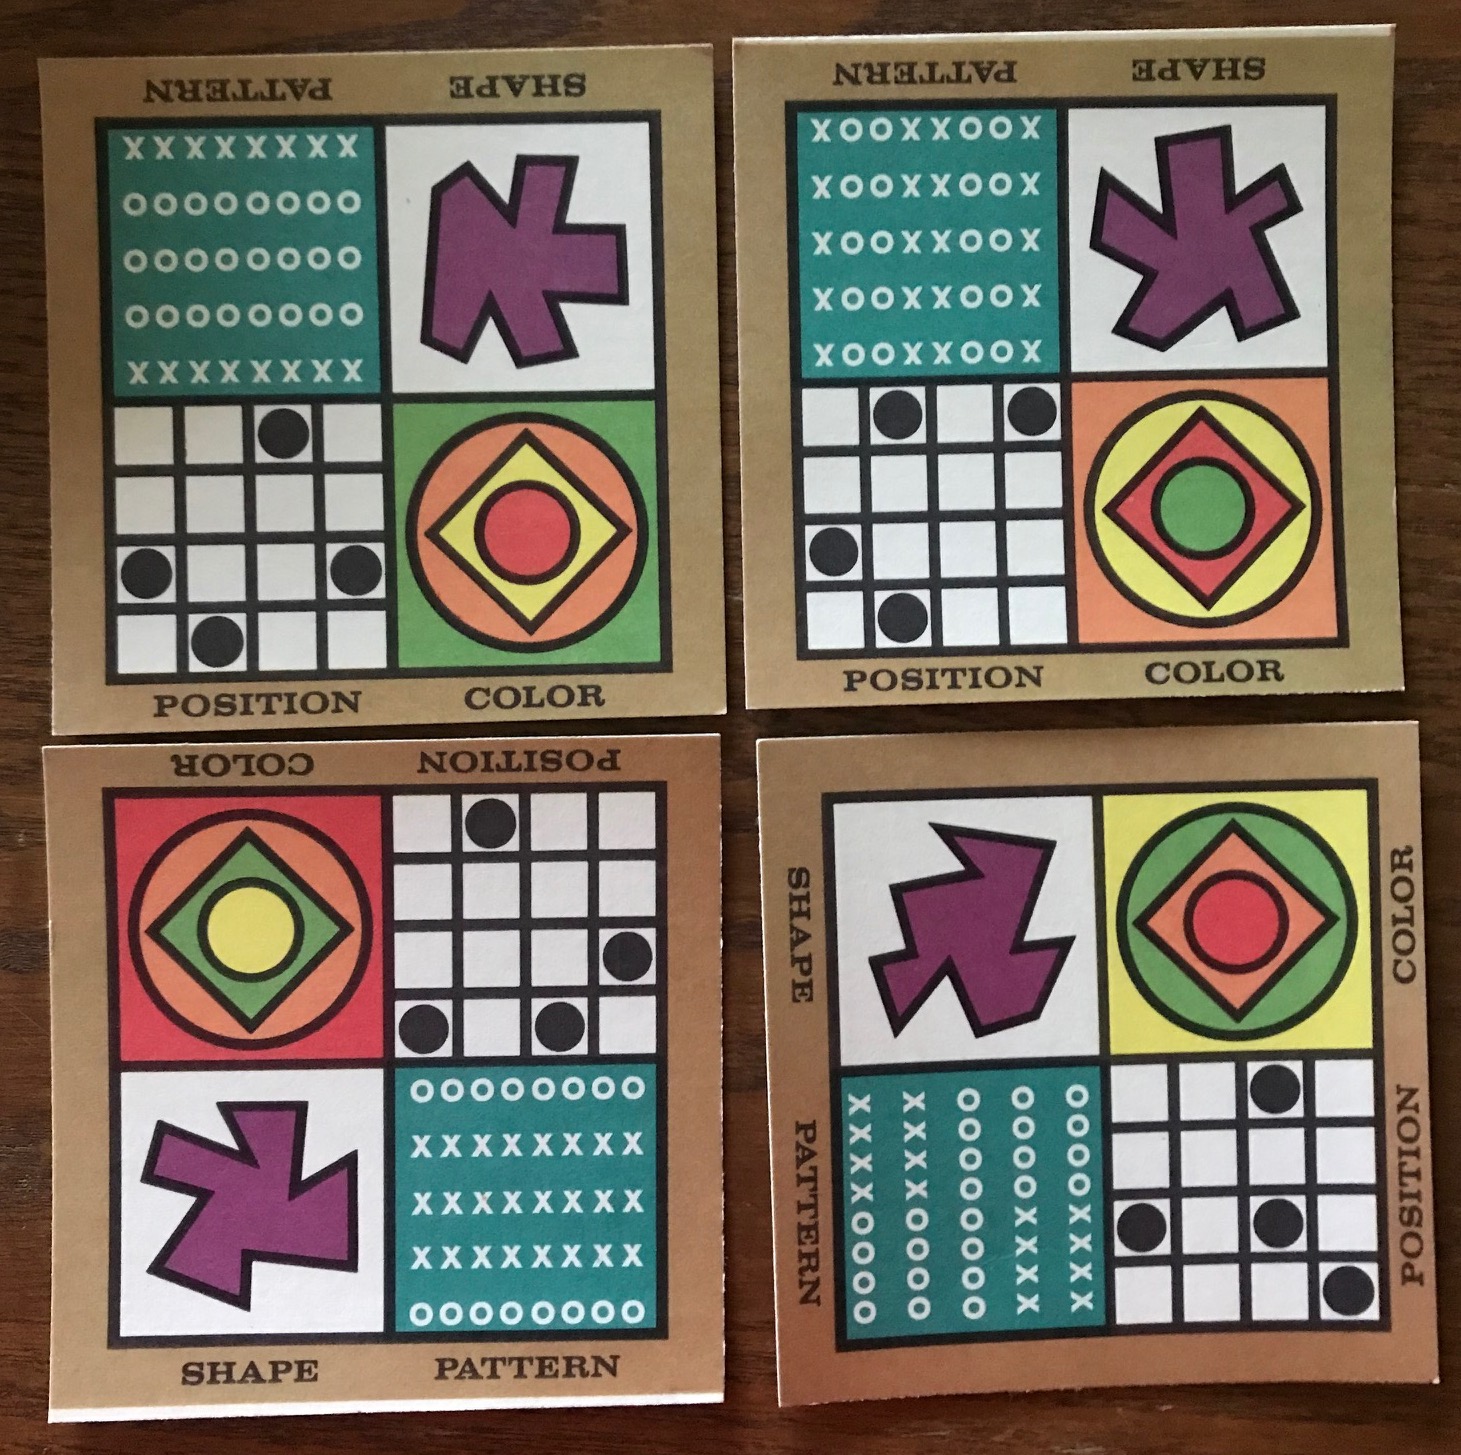 Four sample tan cards showing four different design patterns on each